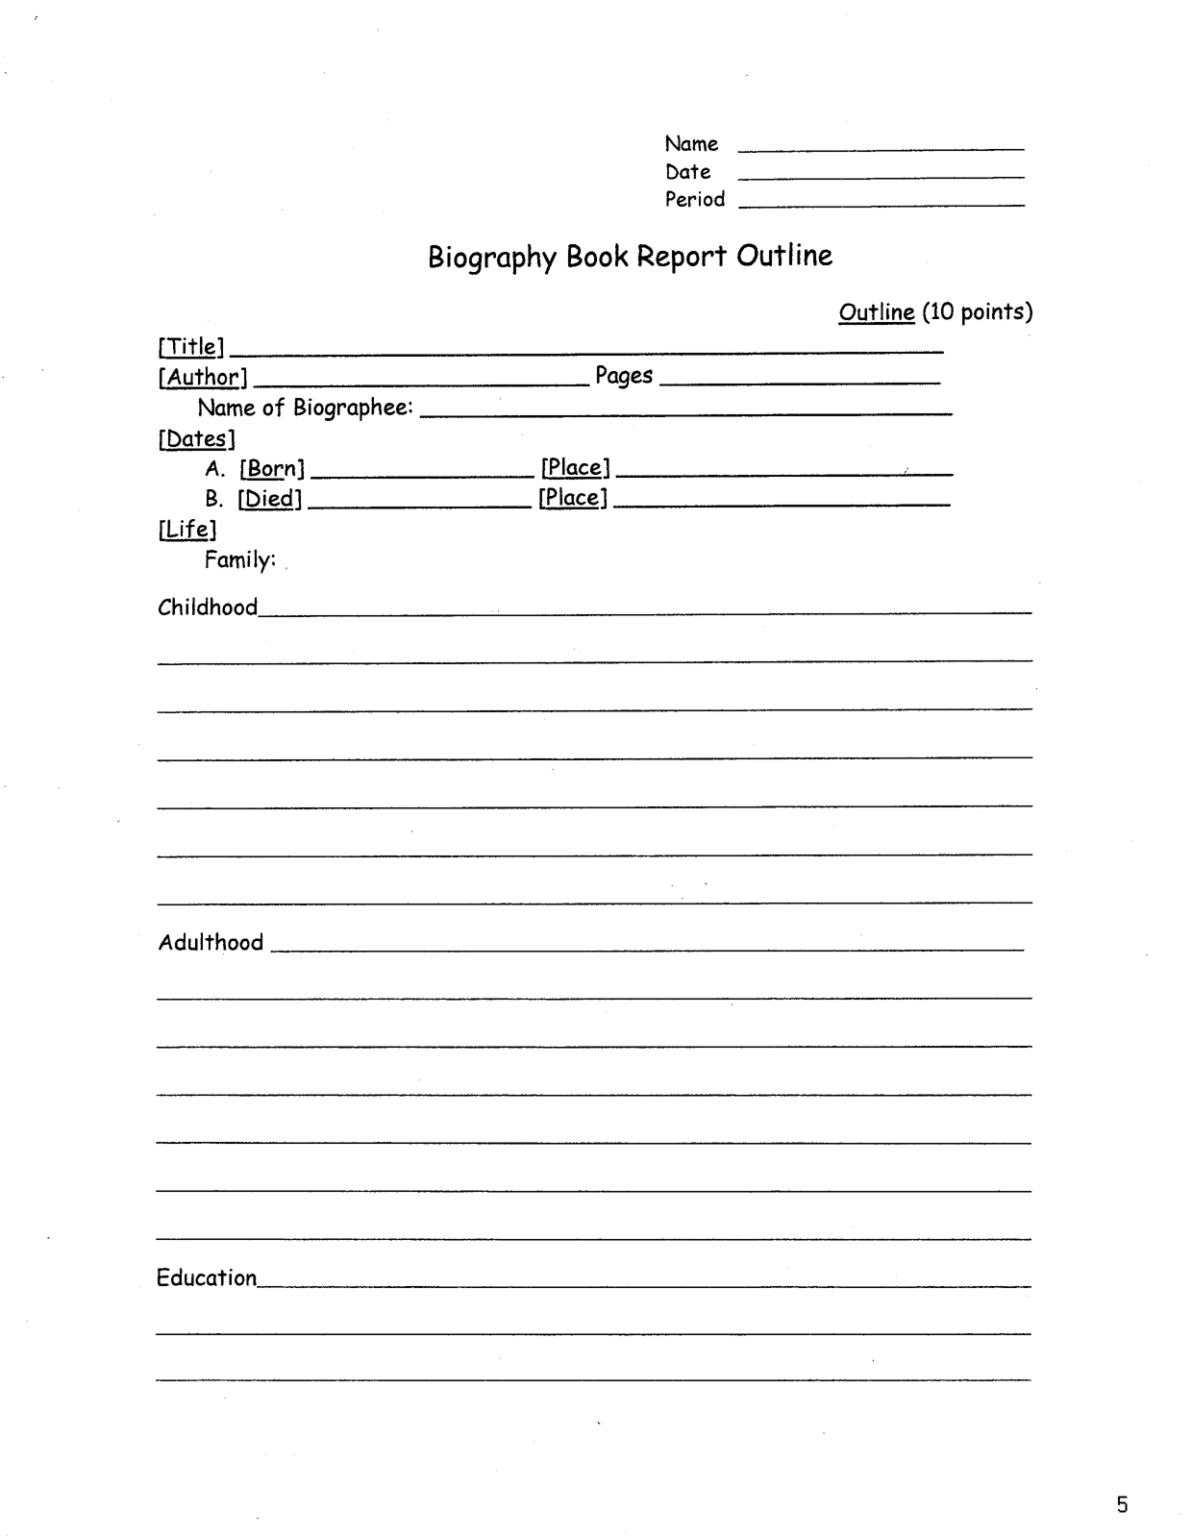 013-biography-book-report-template-ideas-outline-83330-with-book-report